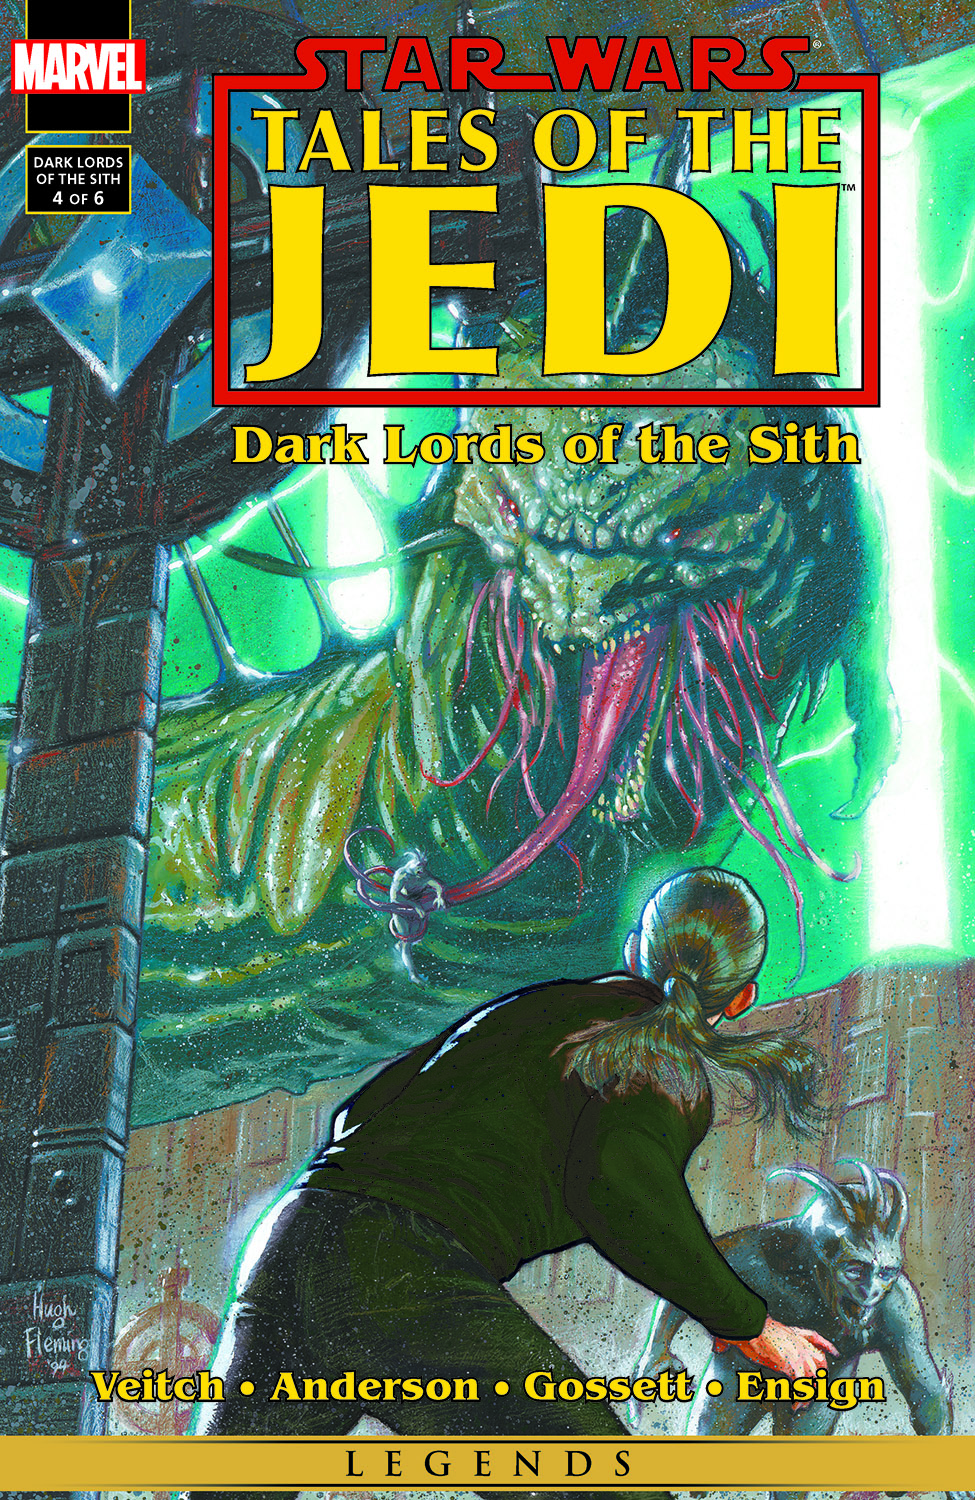 Star Wars: Tales of the Jedi - Dark Lords of the Sith (1994) #4